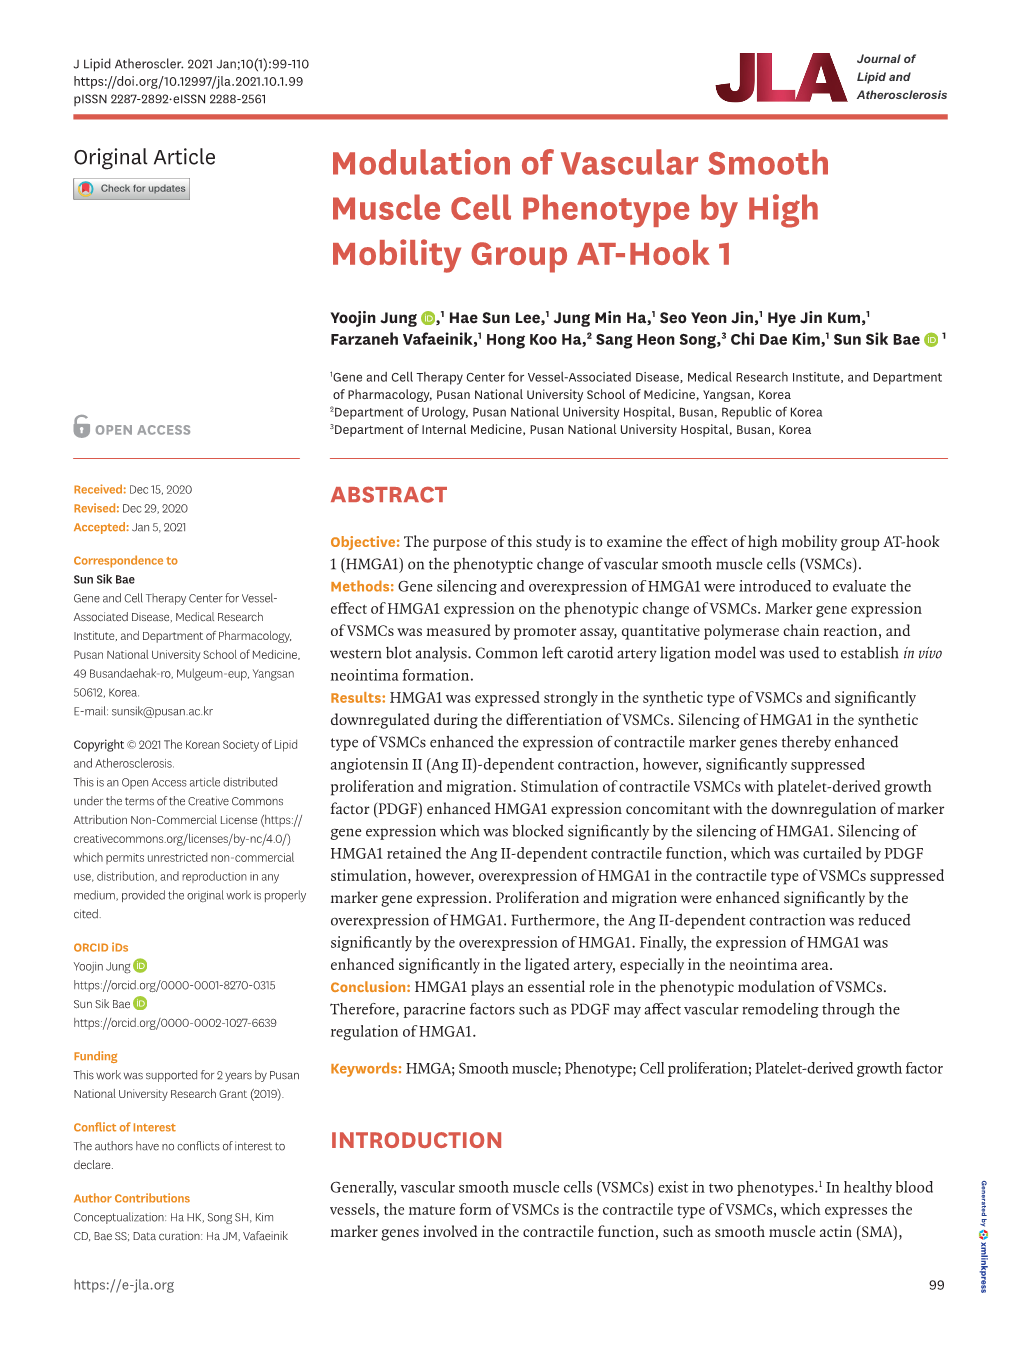 Modulation of Vascular Smooth Muscle Cell Phenotype by High Mobility Group AT-Hook 1